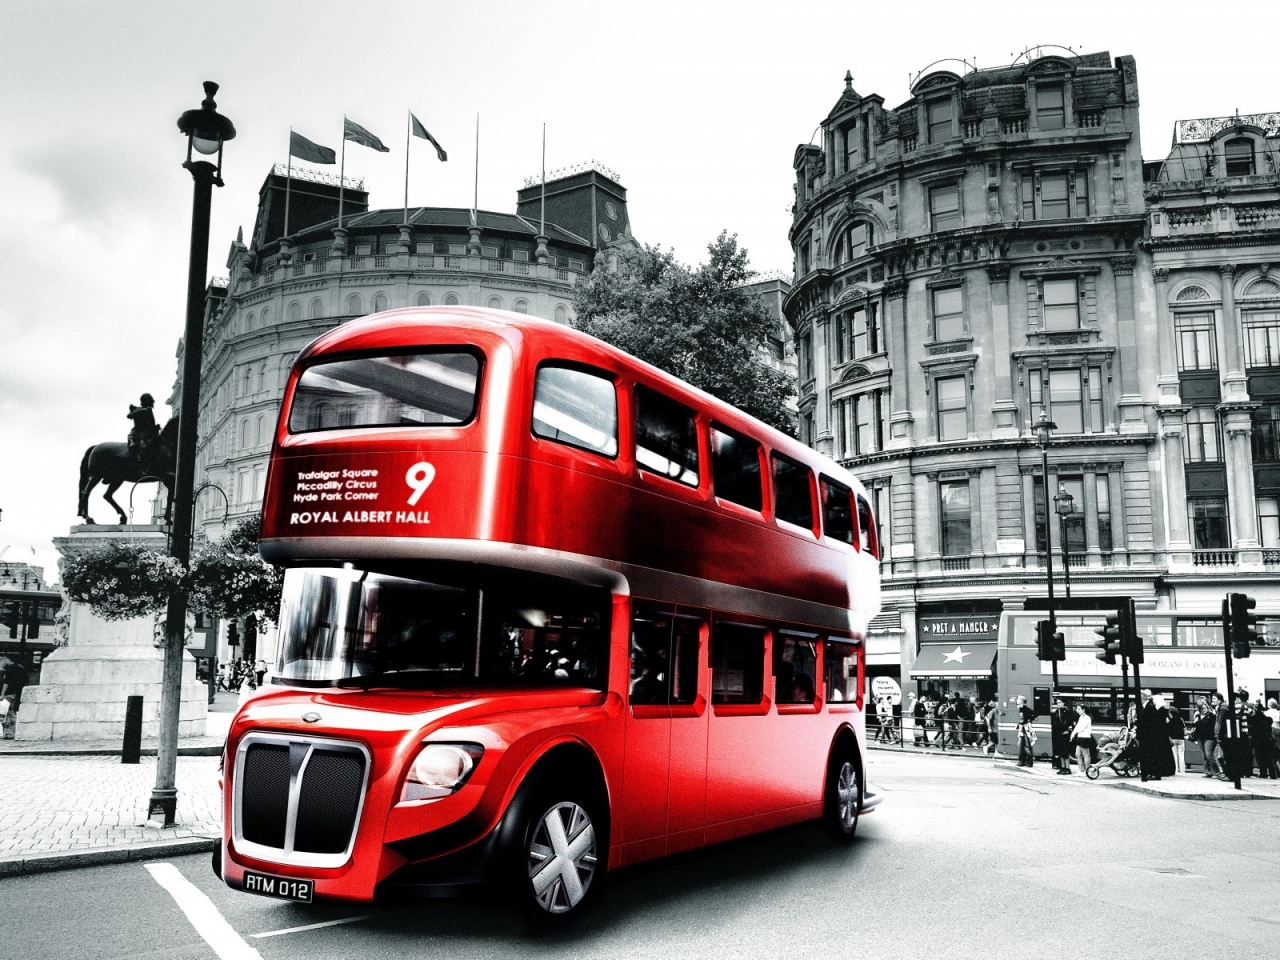 London Bus Design for 1280 x 960 resolution